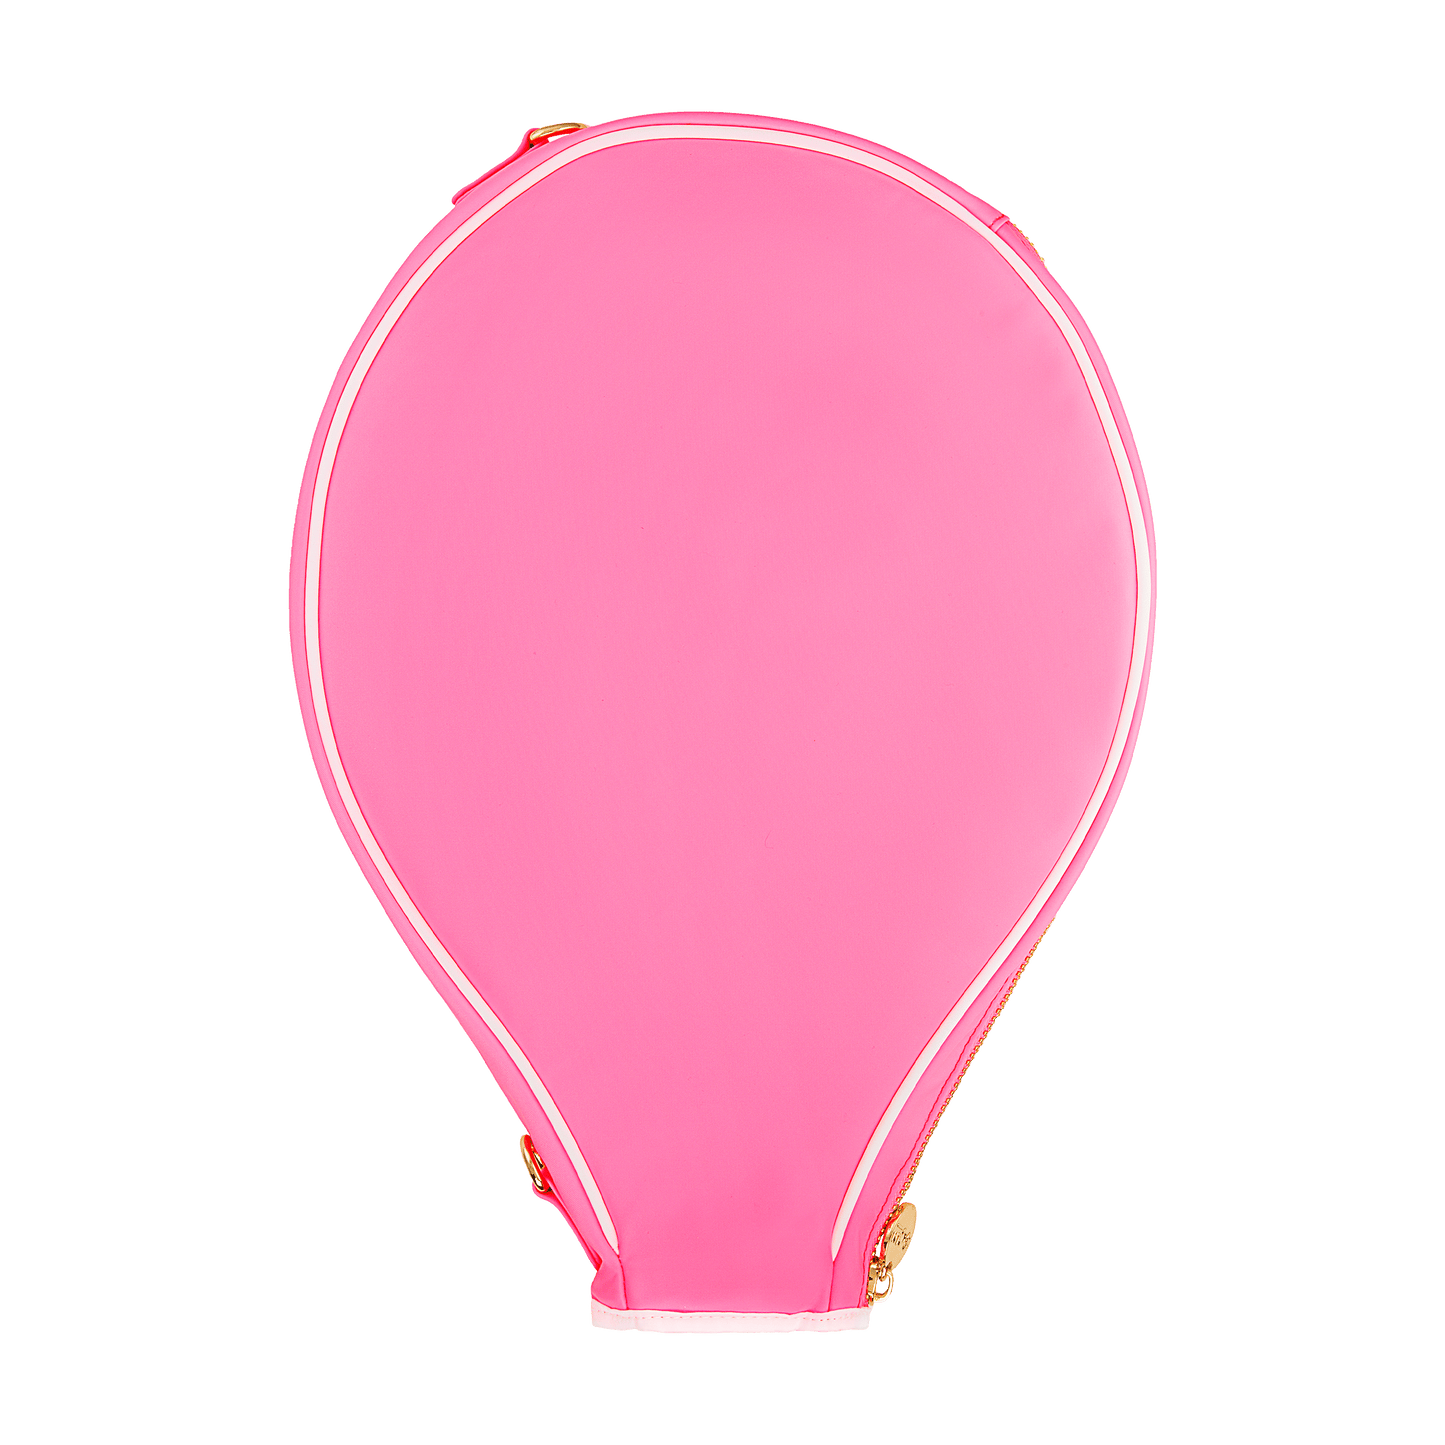 tennis racket cover